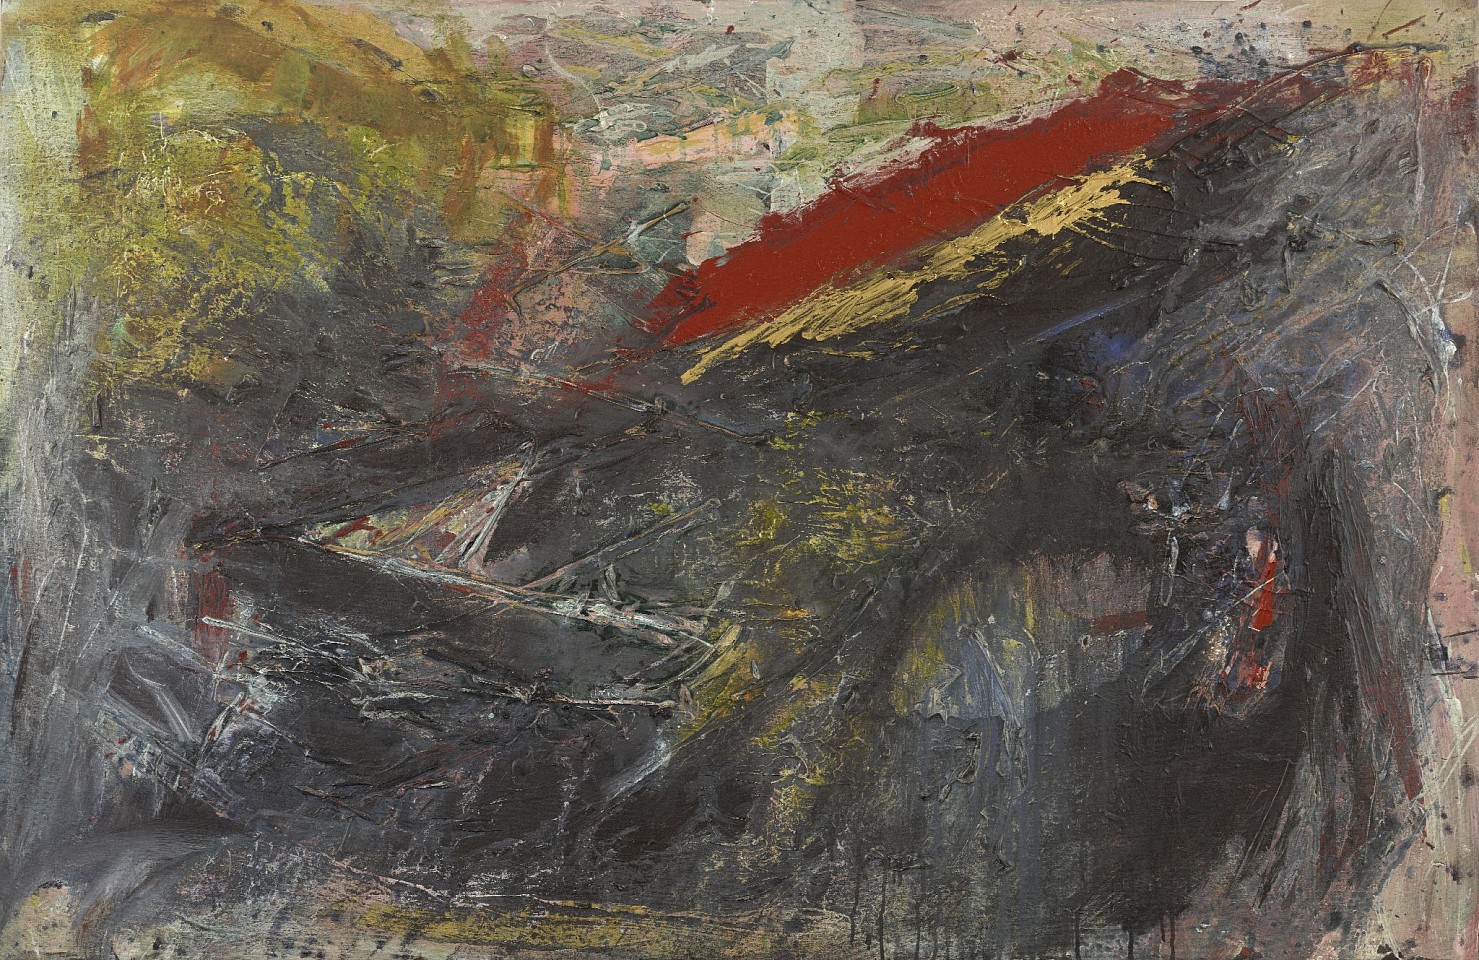 Ann Purcell, Buried Treasure (Kali Poem #66), 1987-1988, 2008
Acrylic on canvas, 40 x 62 in. (101.6 x 157.5 cm)
PUR-00105